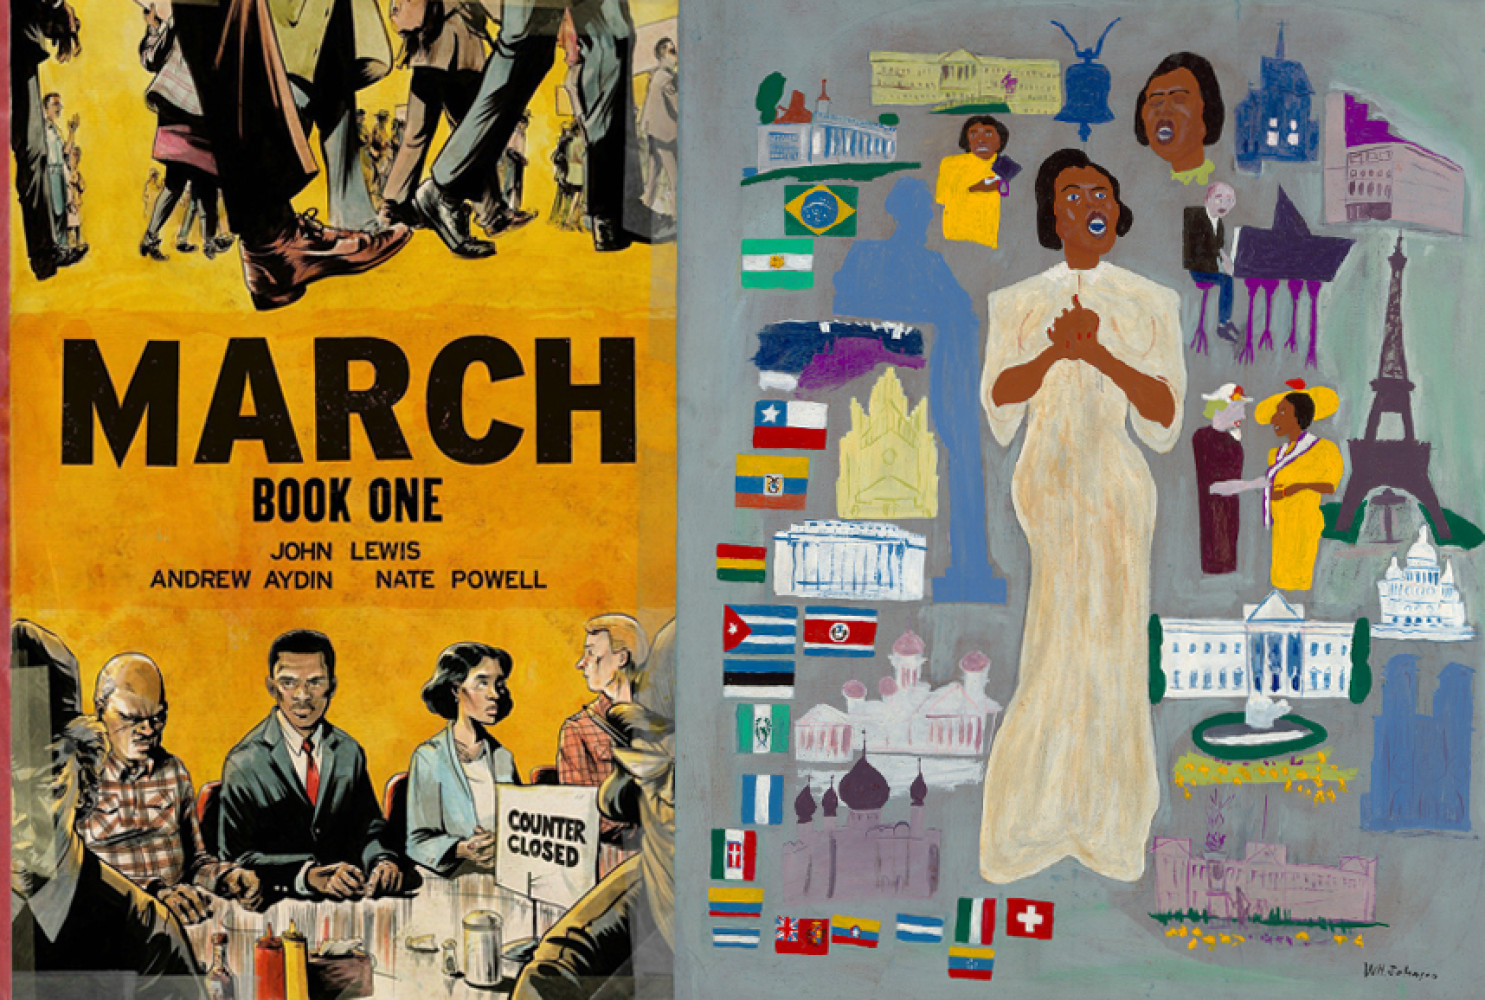 (right) Cover art for March; (left)  Marian Anderson (detail), ca. 1945, by William H. Johnson (American, 1901-1972). Oil on paperboard, 35 5/8 x 28 7/8 inches. Image courtesy of Smithsonian American Art Museum, Gift of the Harmon Foundation. 